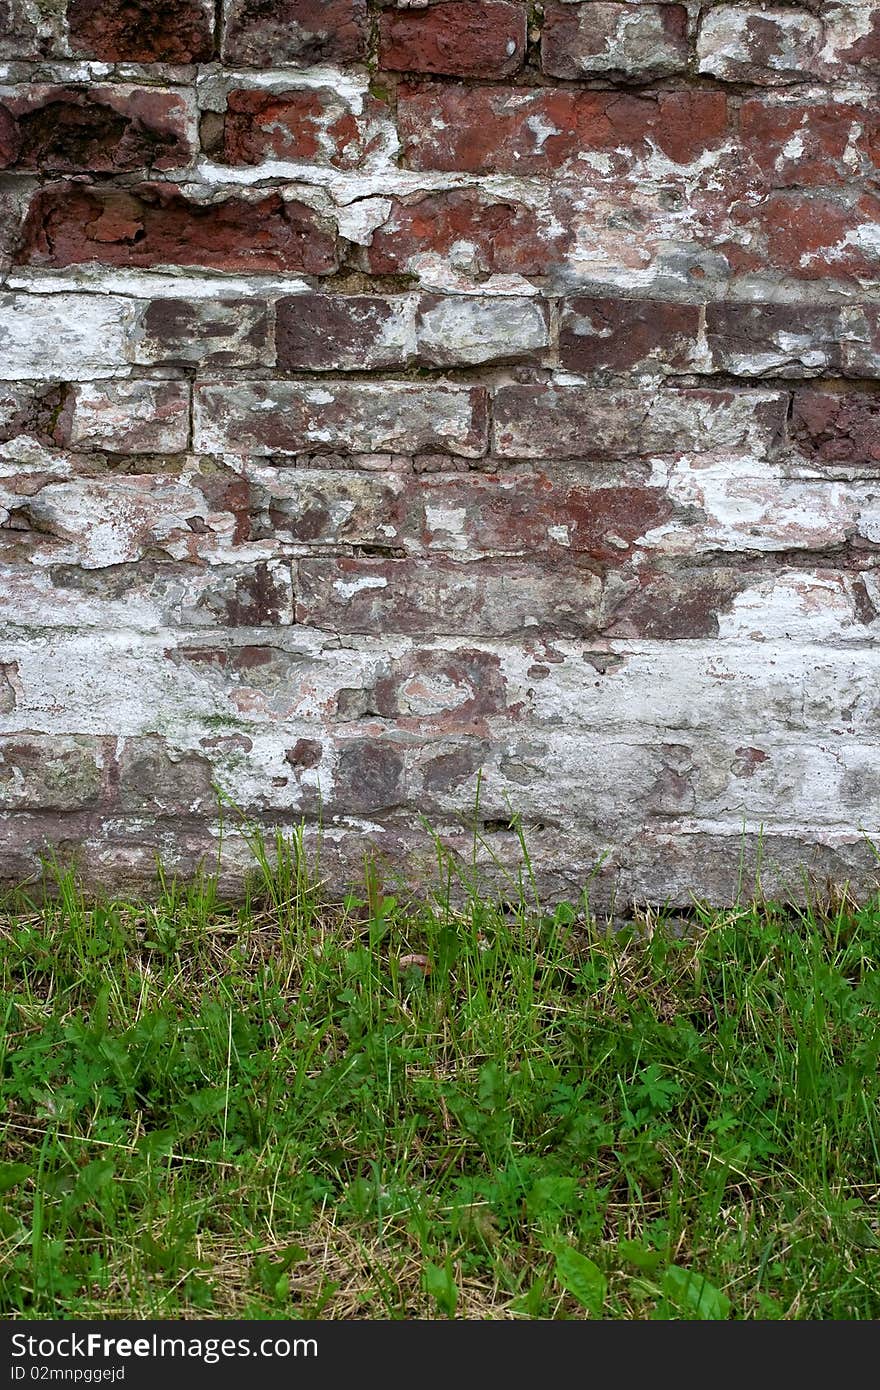 A fragment of the old walls and masonry. Texture. Background. A fragment of the old walls and masonry. Texture. Background